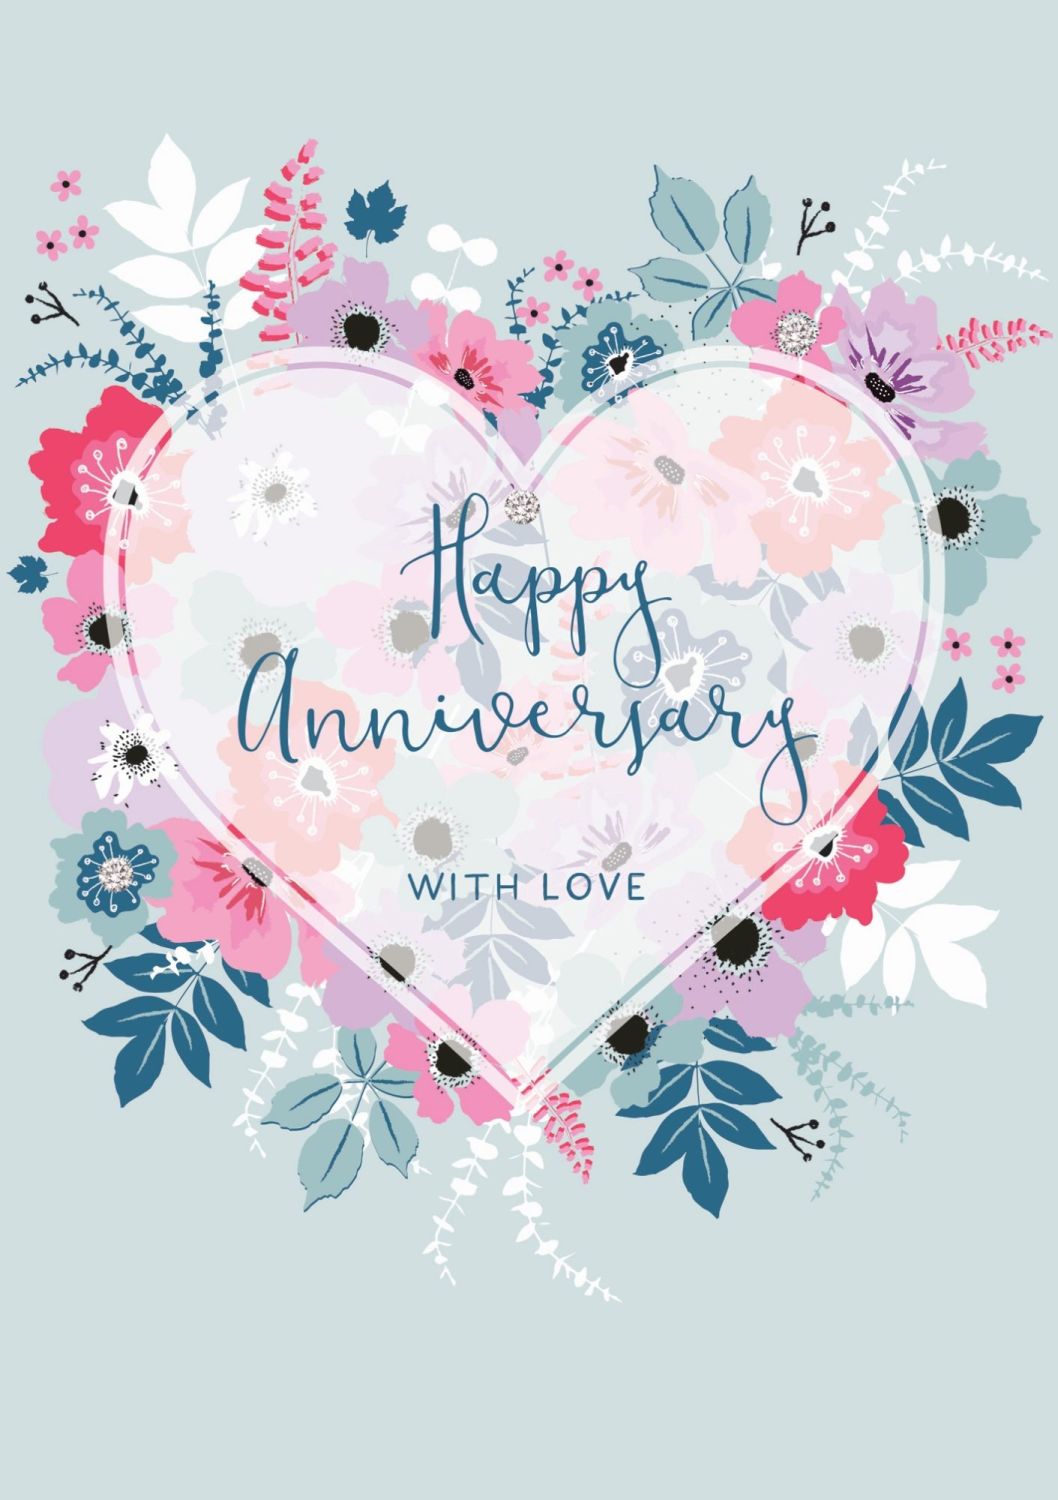 Happy Anniversary Greeting Cards - WITH LOVE - Wedding ANNIVERSARY Cards - 